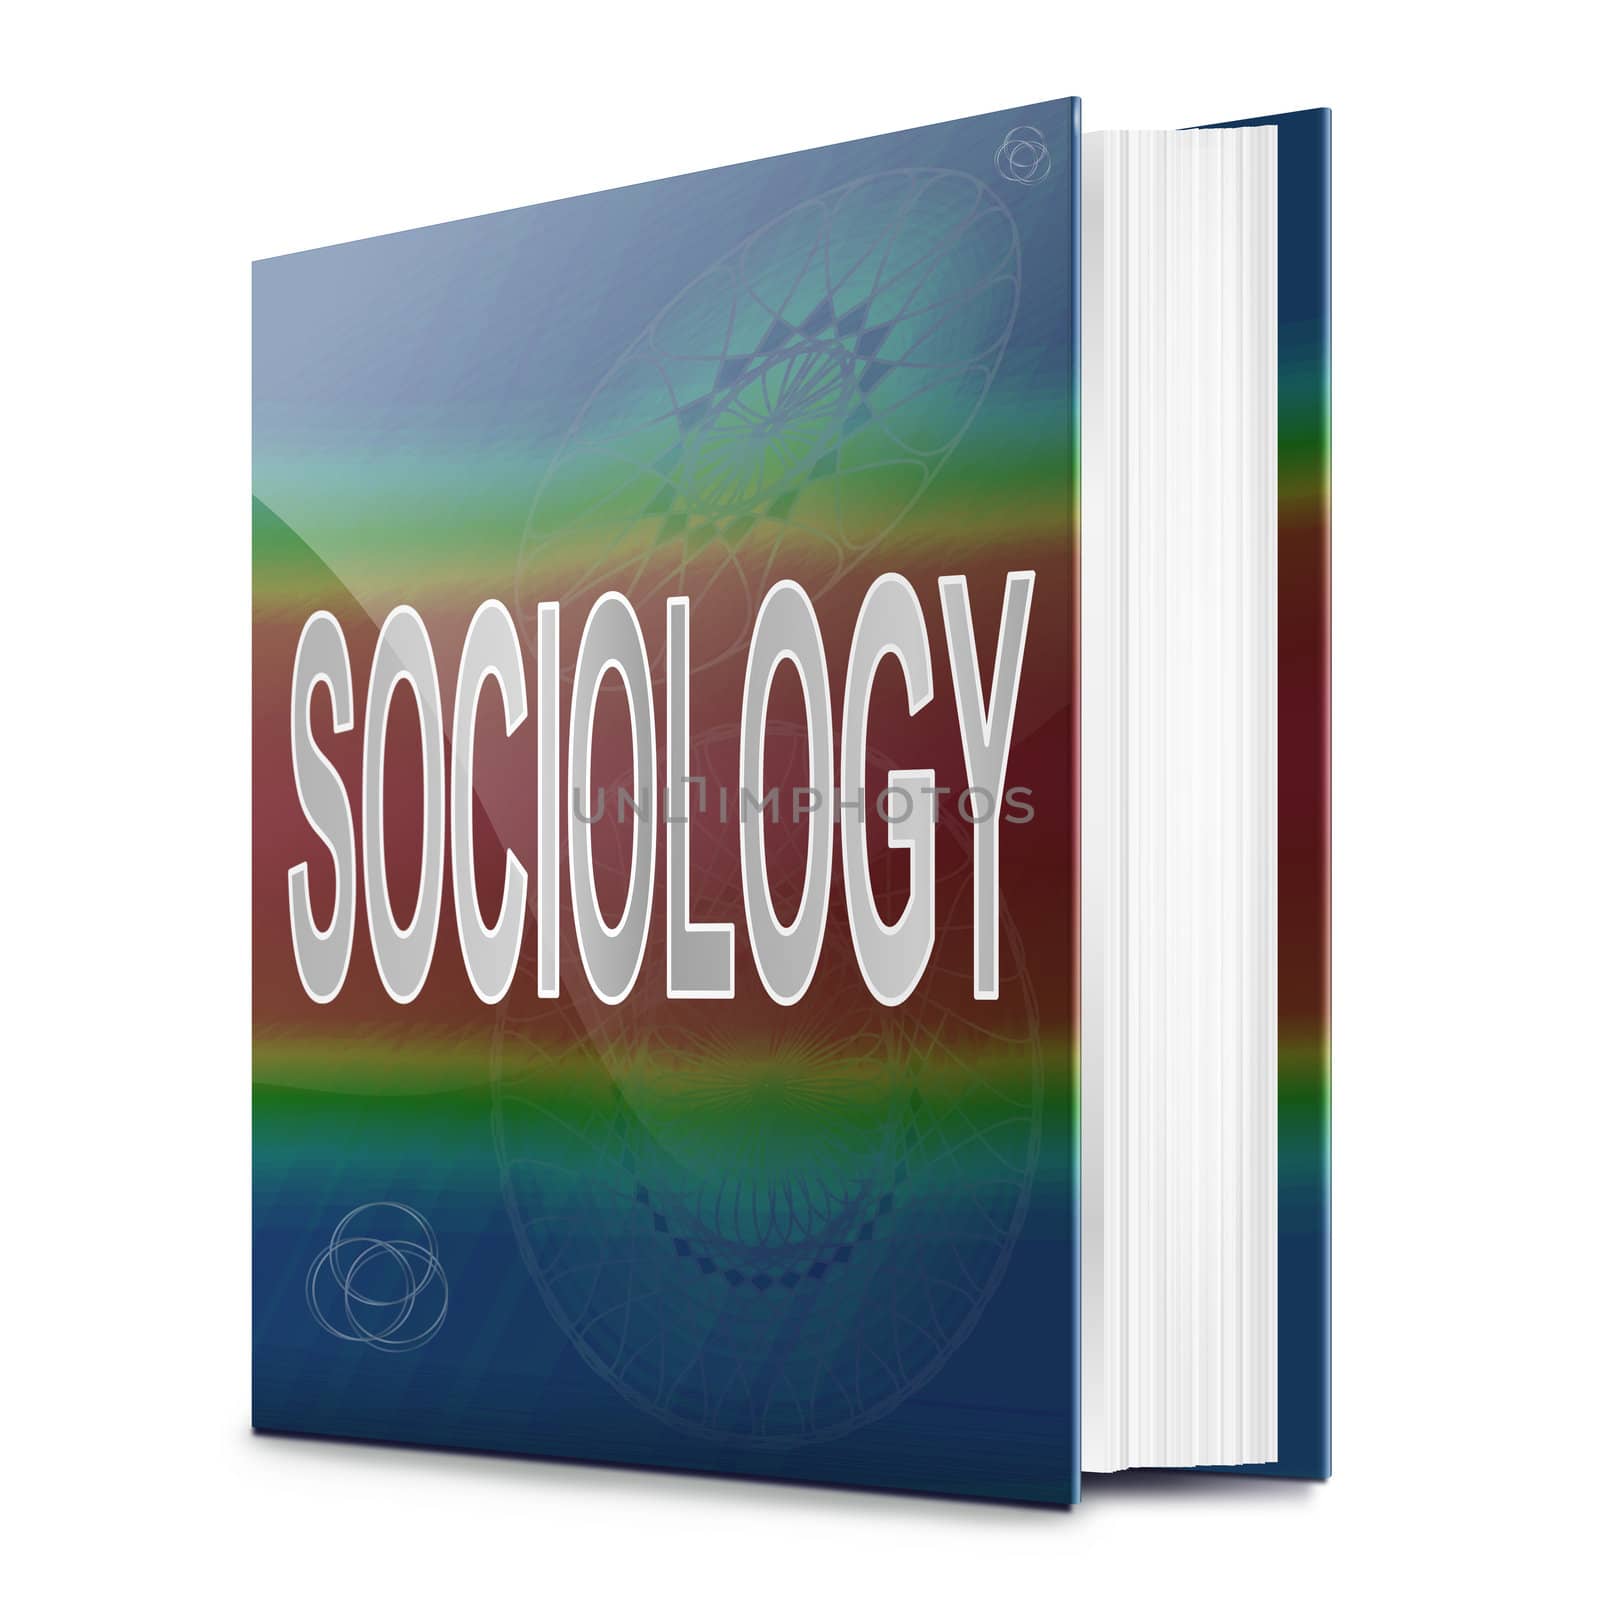 Illustration depicting a text book with a sociology concept title. White background.